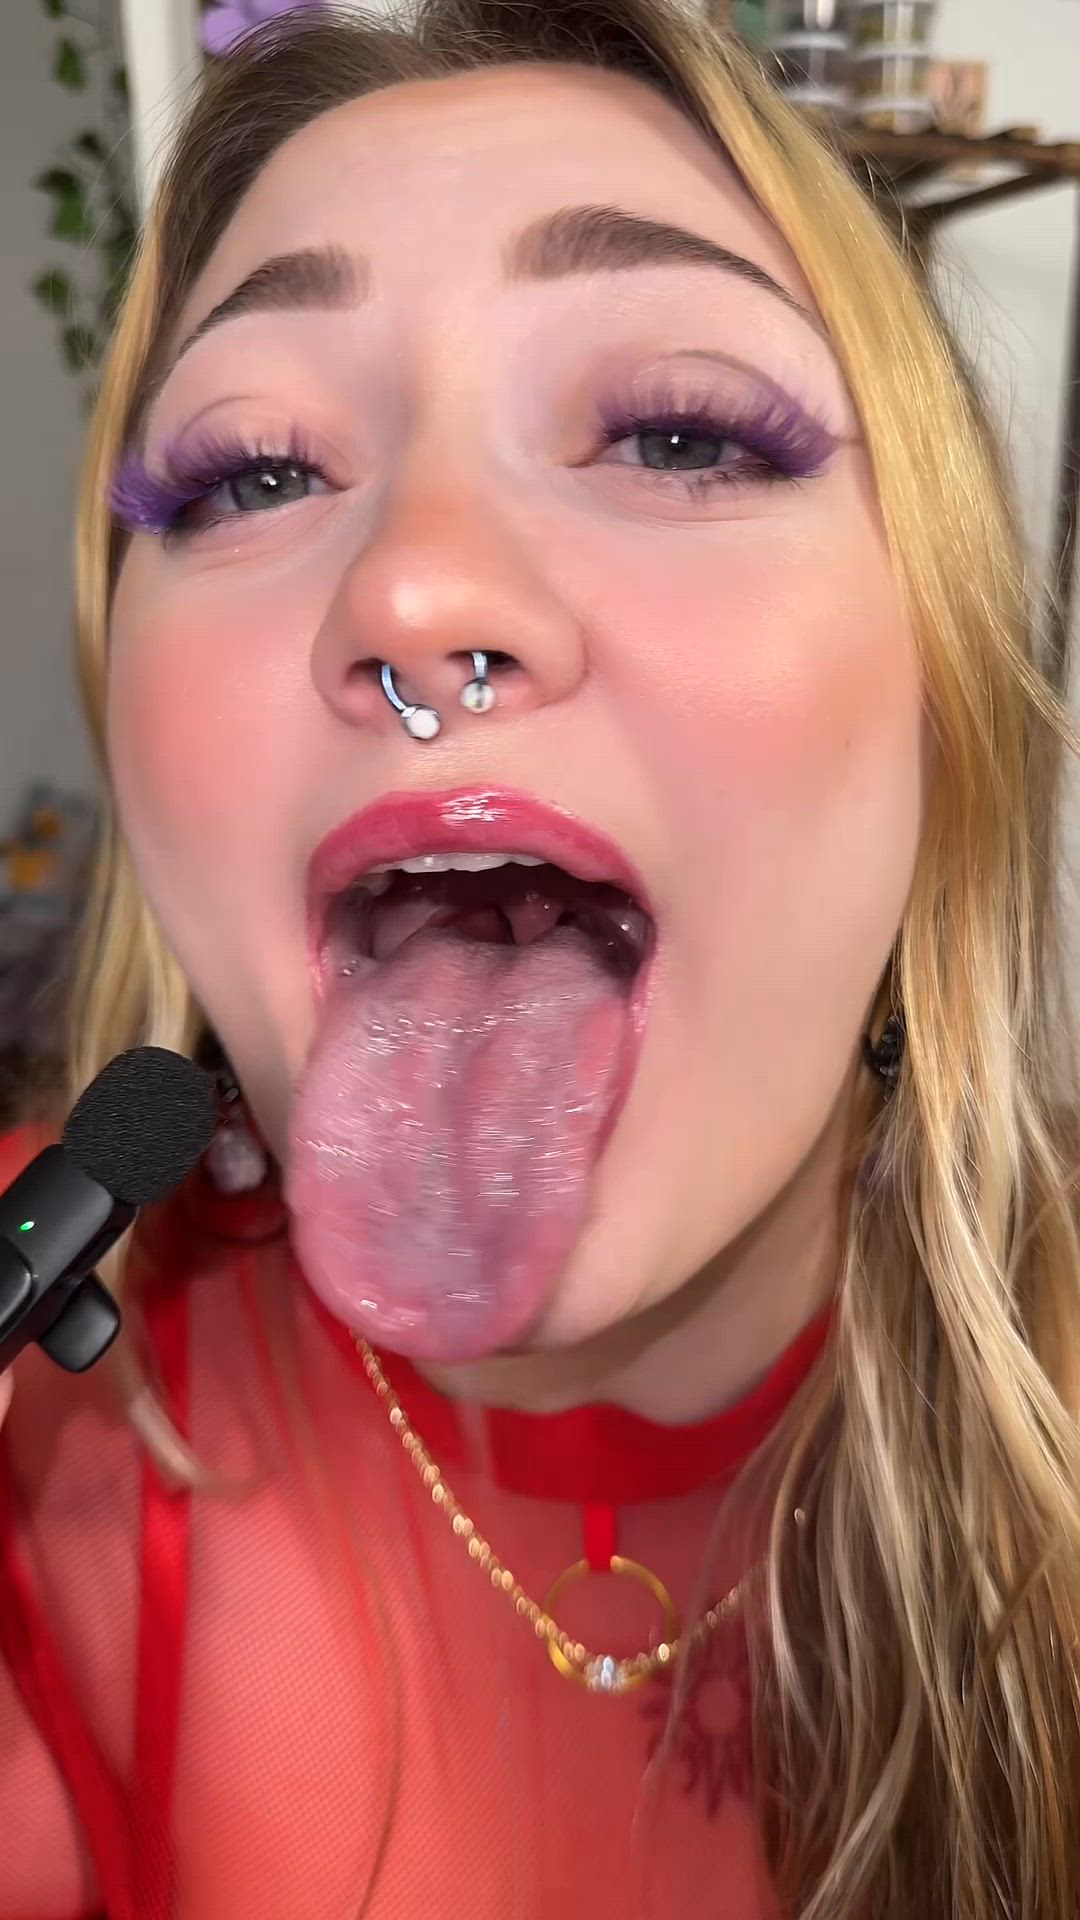 Spit porn video with onlyfans model kween1322 <strong>@strawberrykween</strong>